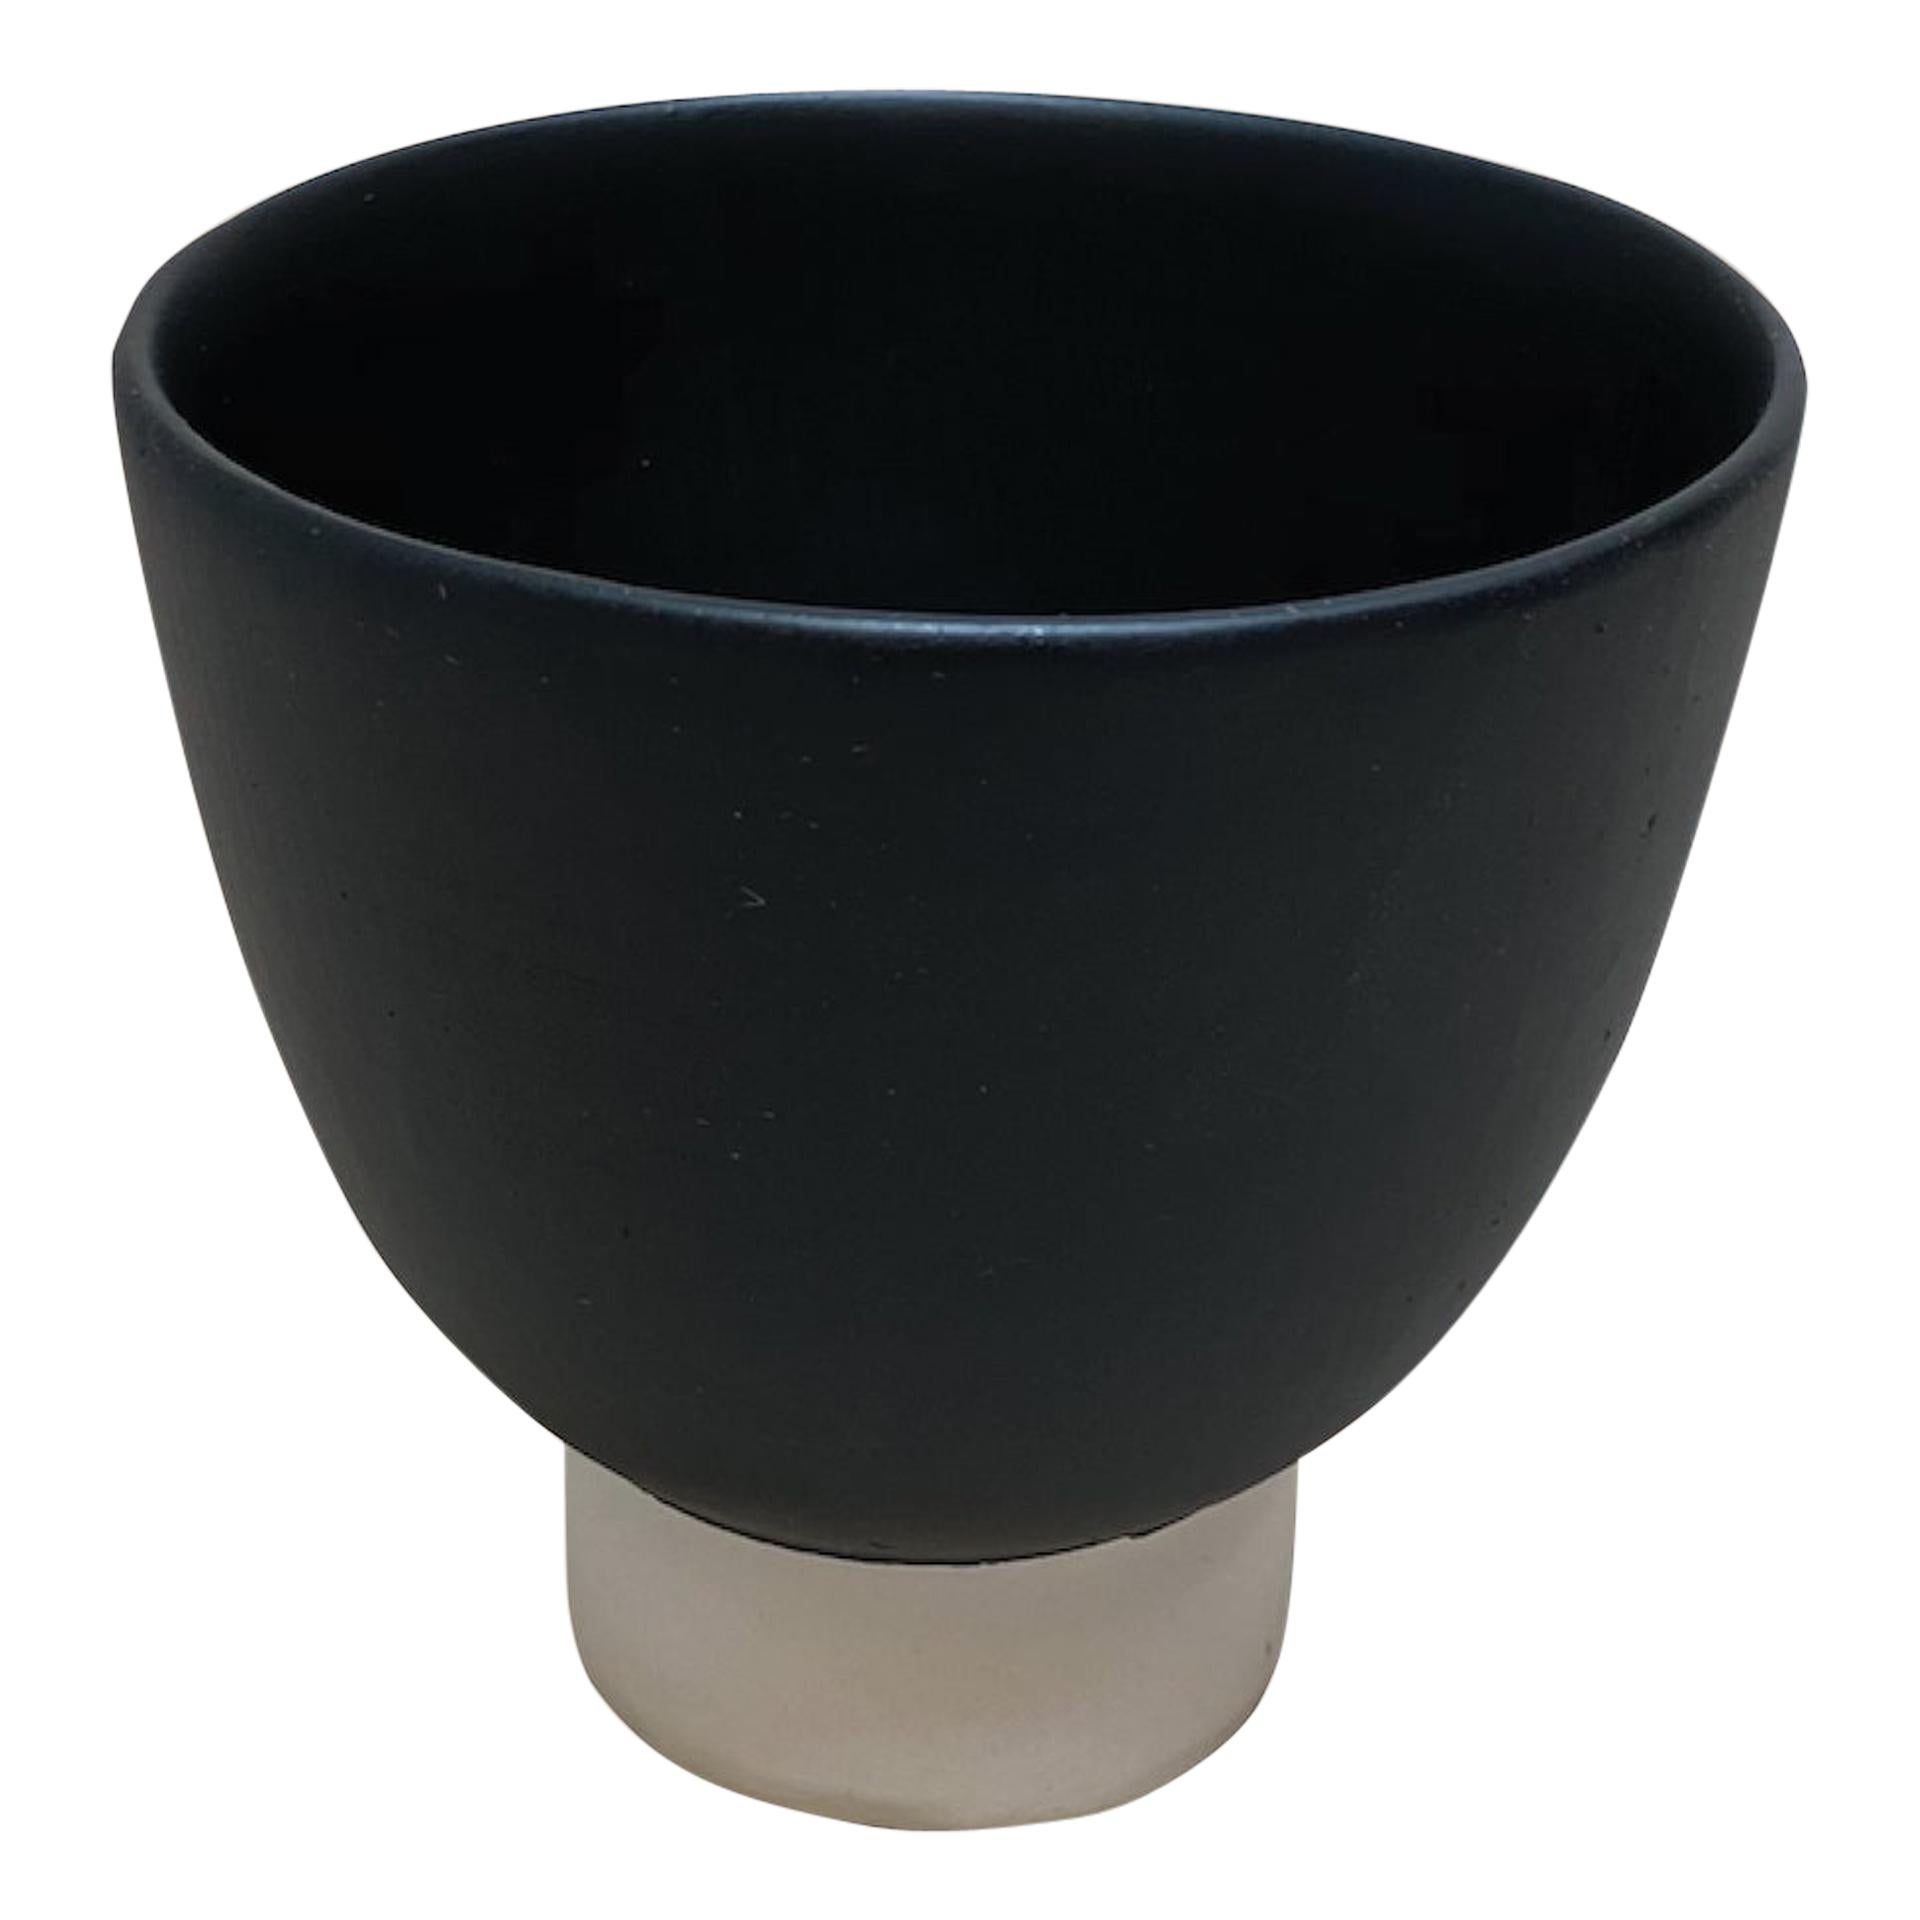 Ott Another Paradigmatic Handmade Ceramic Cup by Studio Yoon Seok-Hyeon For Sale